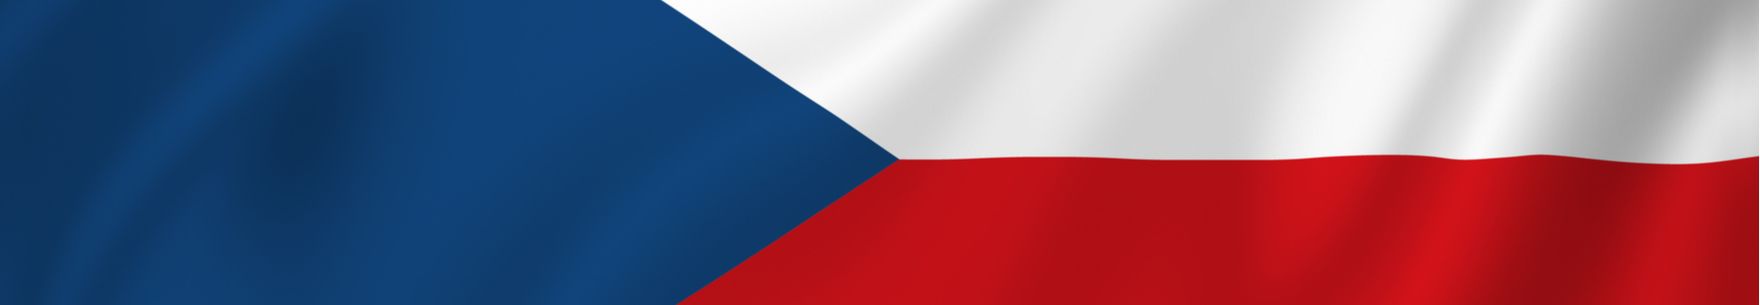 DIDWW adds Outbound SMS in the Czech Republic (+420)